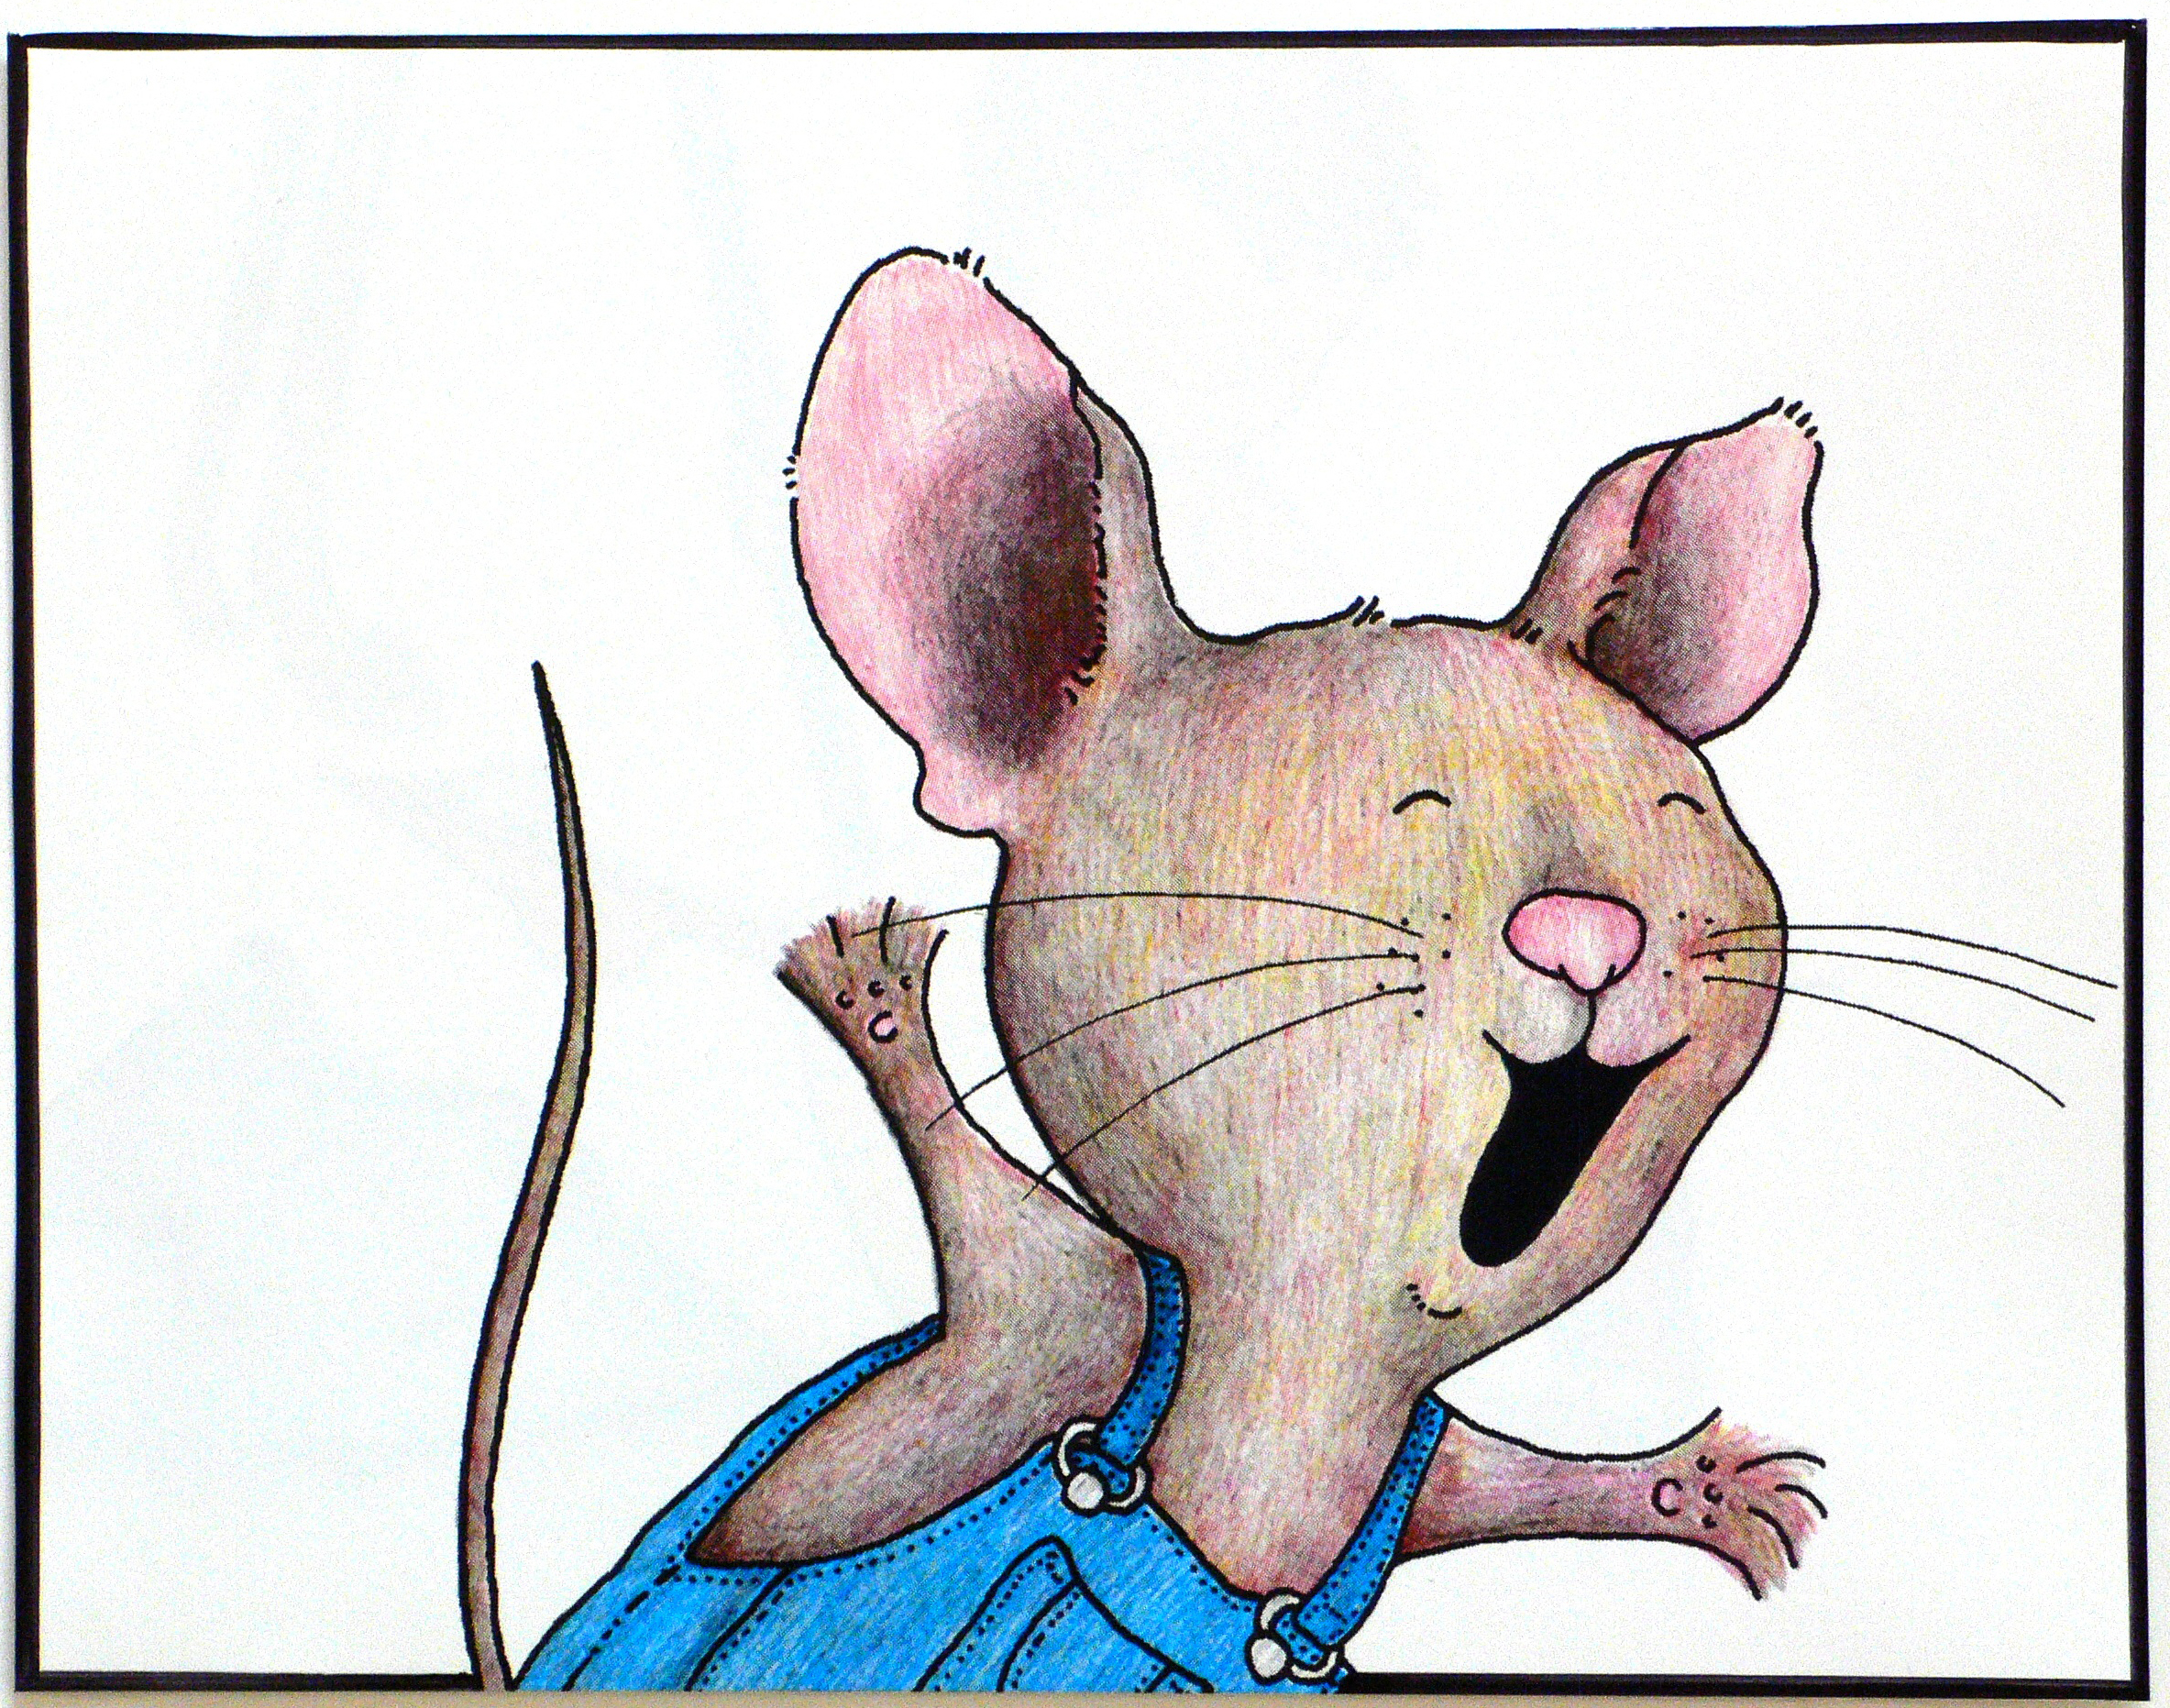 FileIf You Give a Mouse a Cookie (11), illustrated by Felicia Bond.JPG